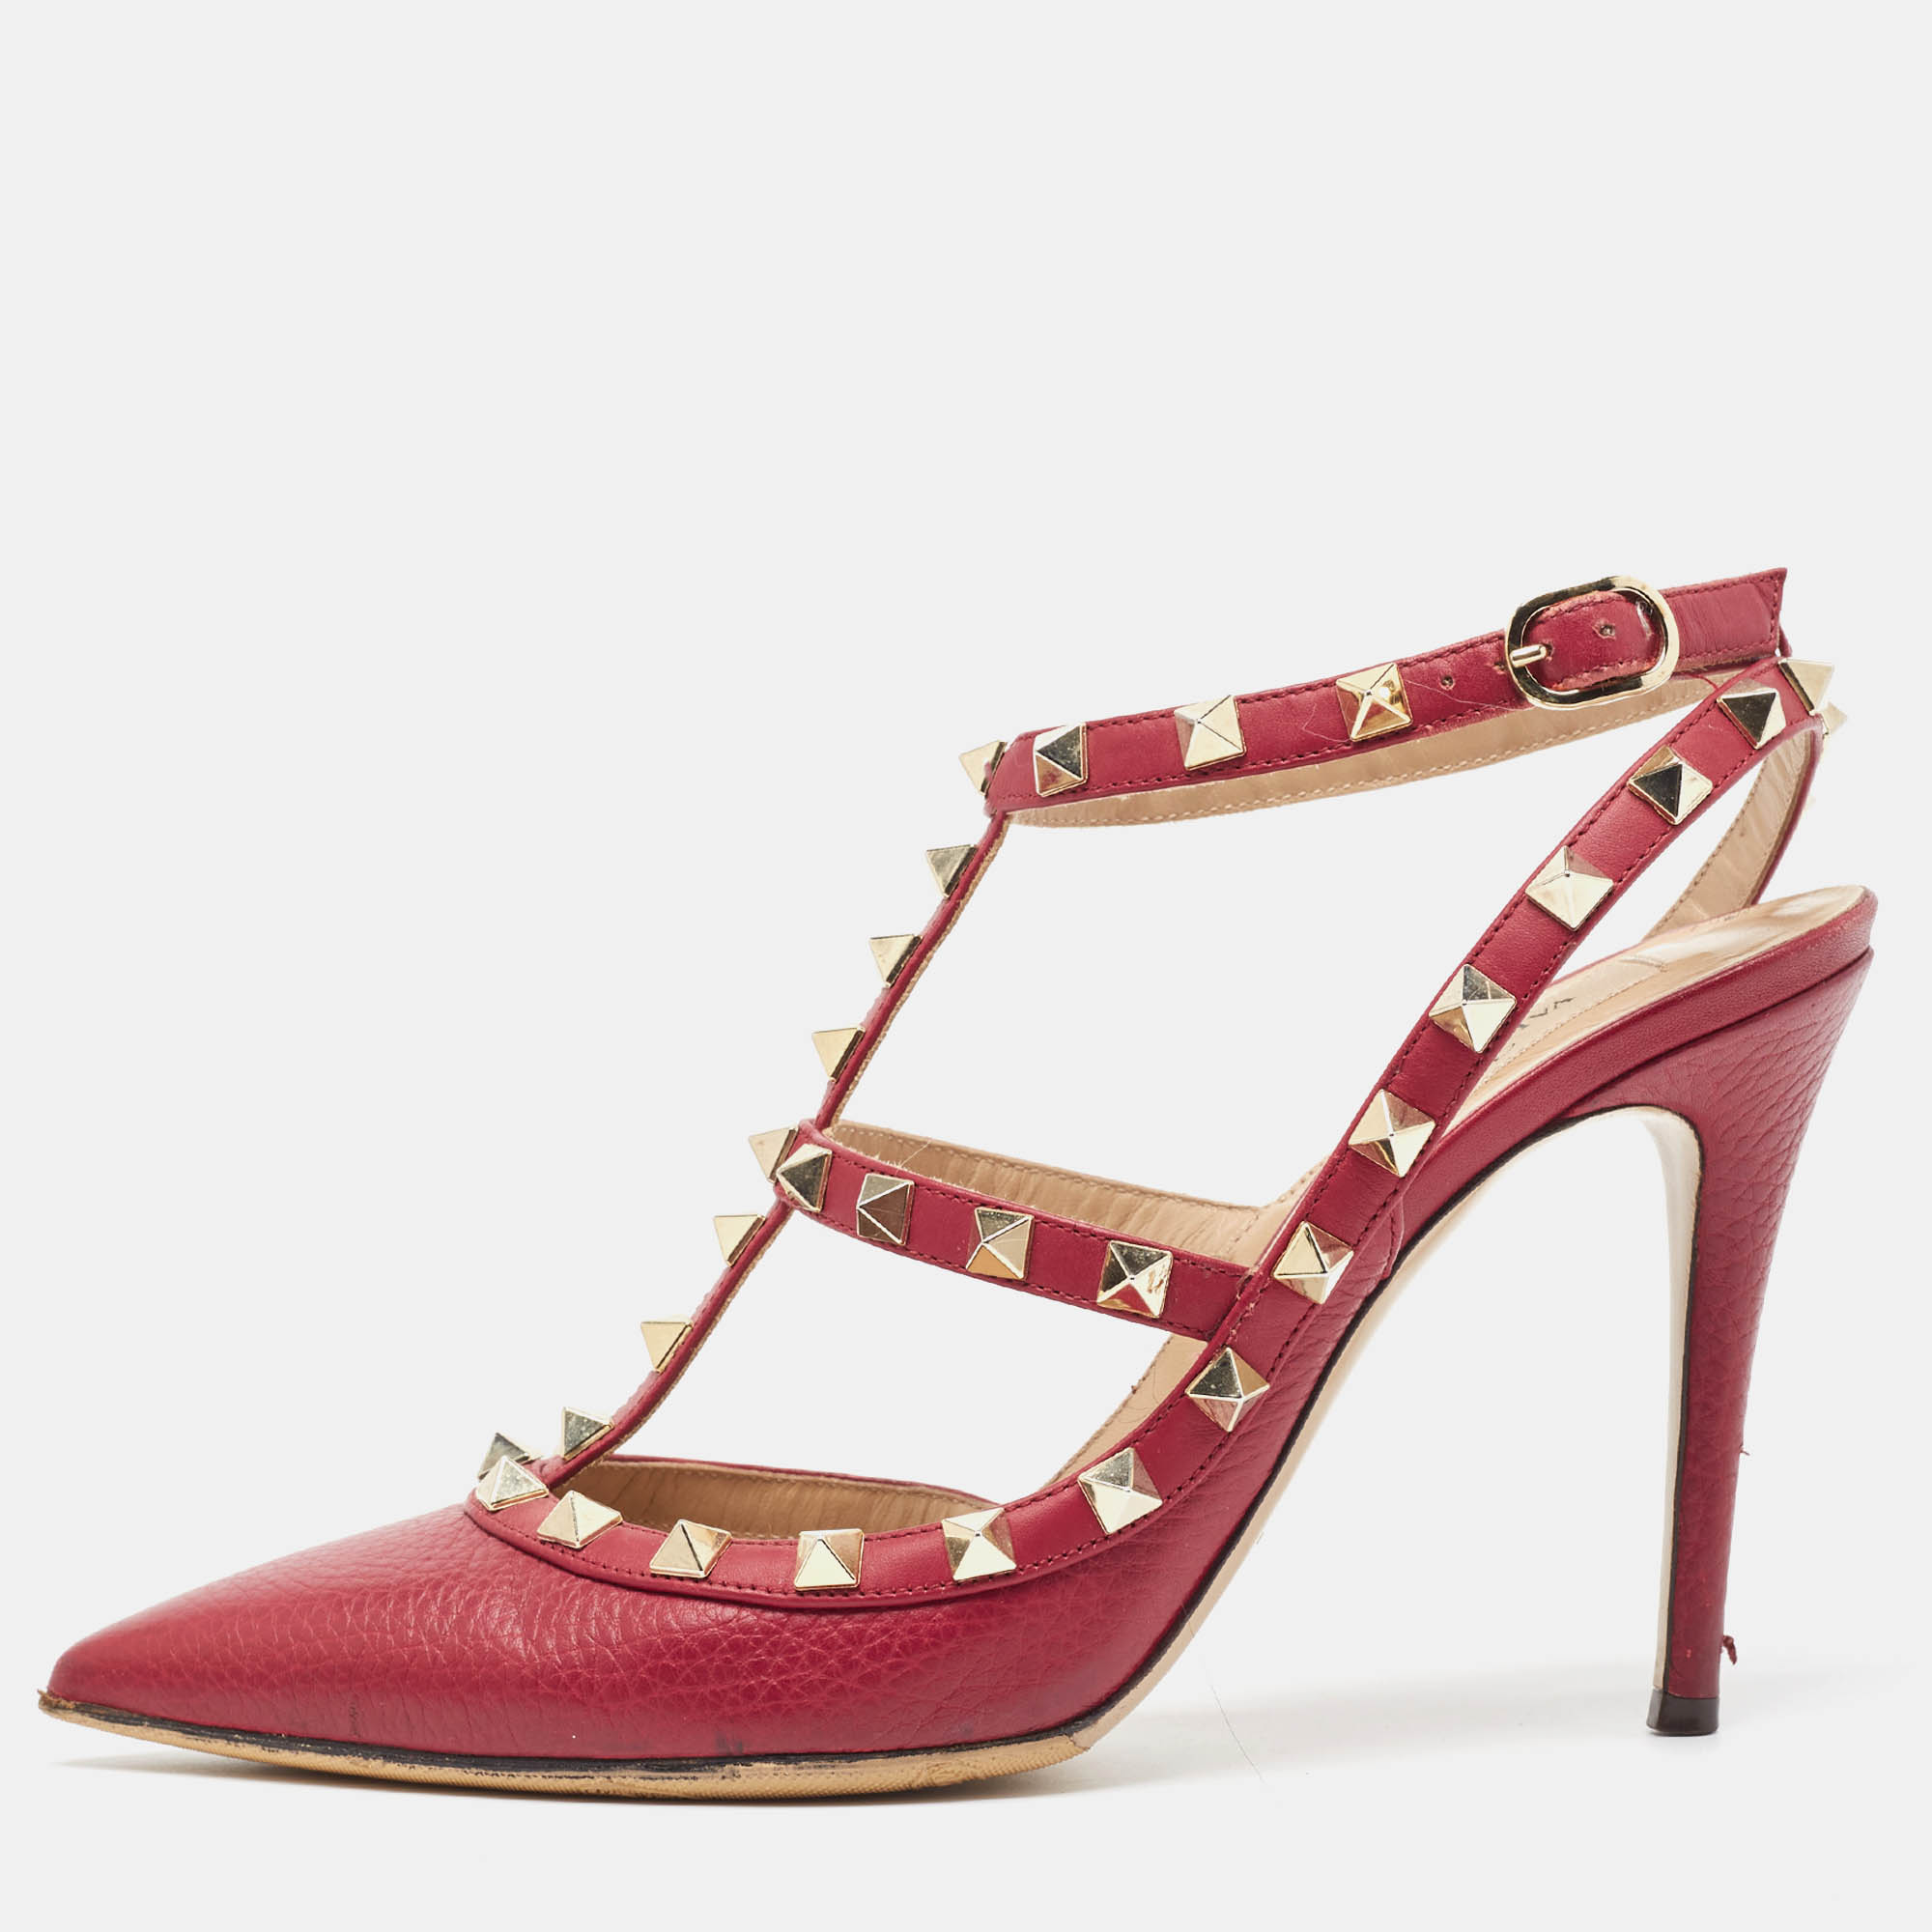 The elegantly placed Rockstuds on the outline of this pair of Valentino pumps make it captivating. Crafted from red leather it is perfectly raised on 10cm heels and cut into a pointed toe silhouette.